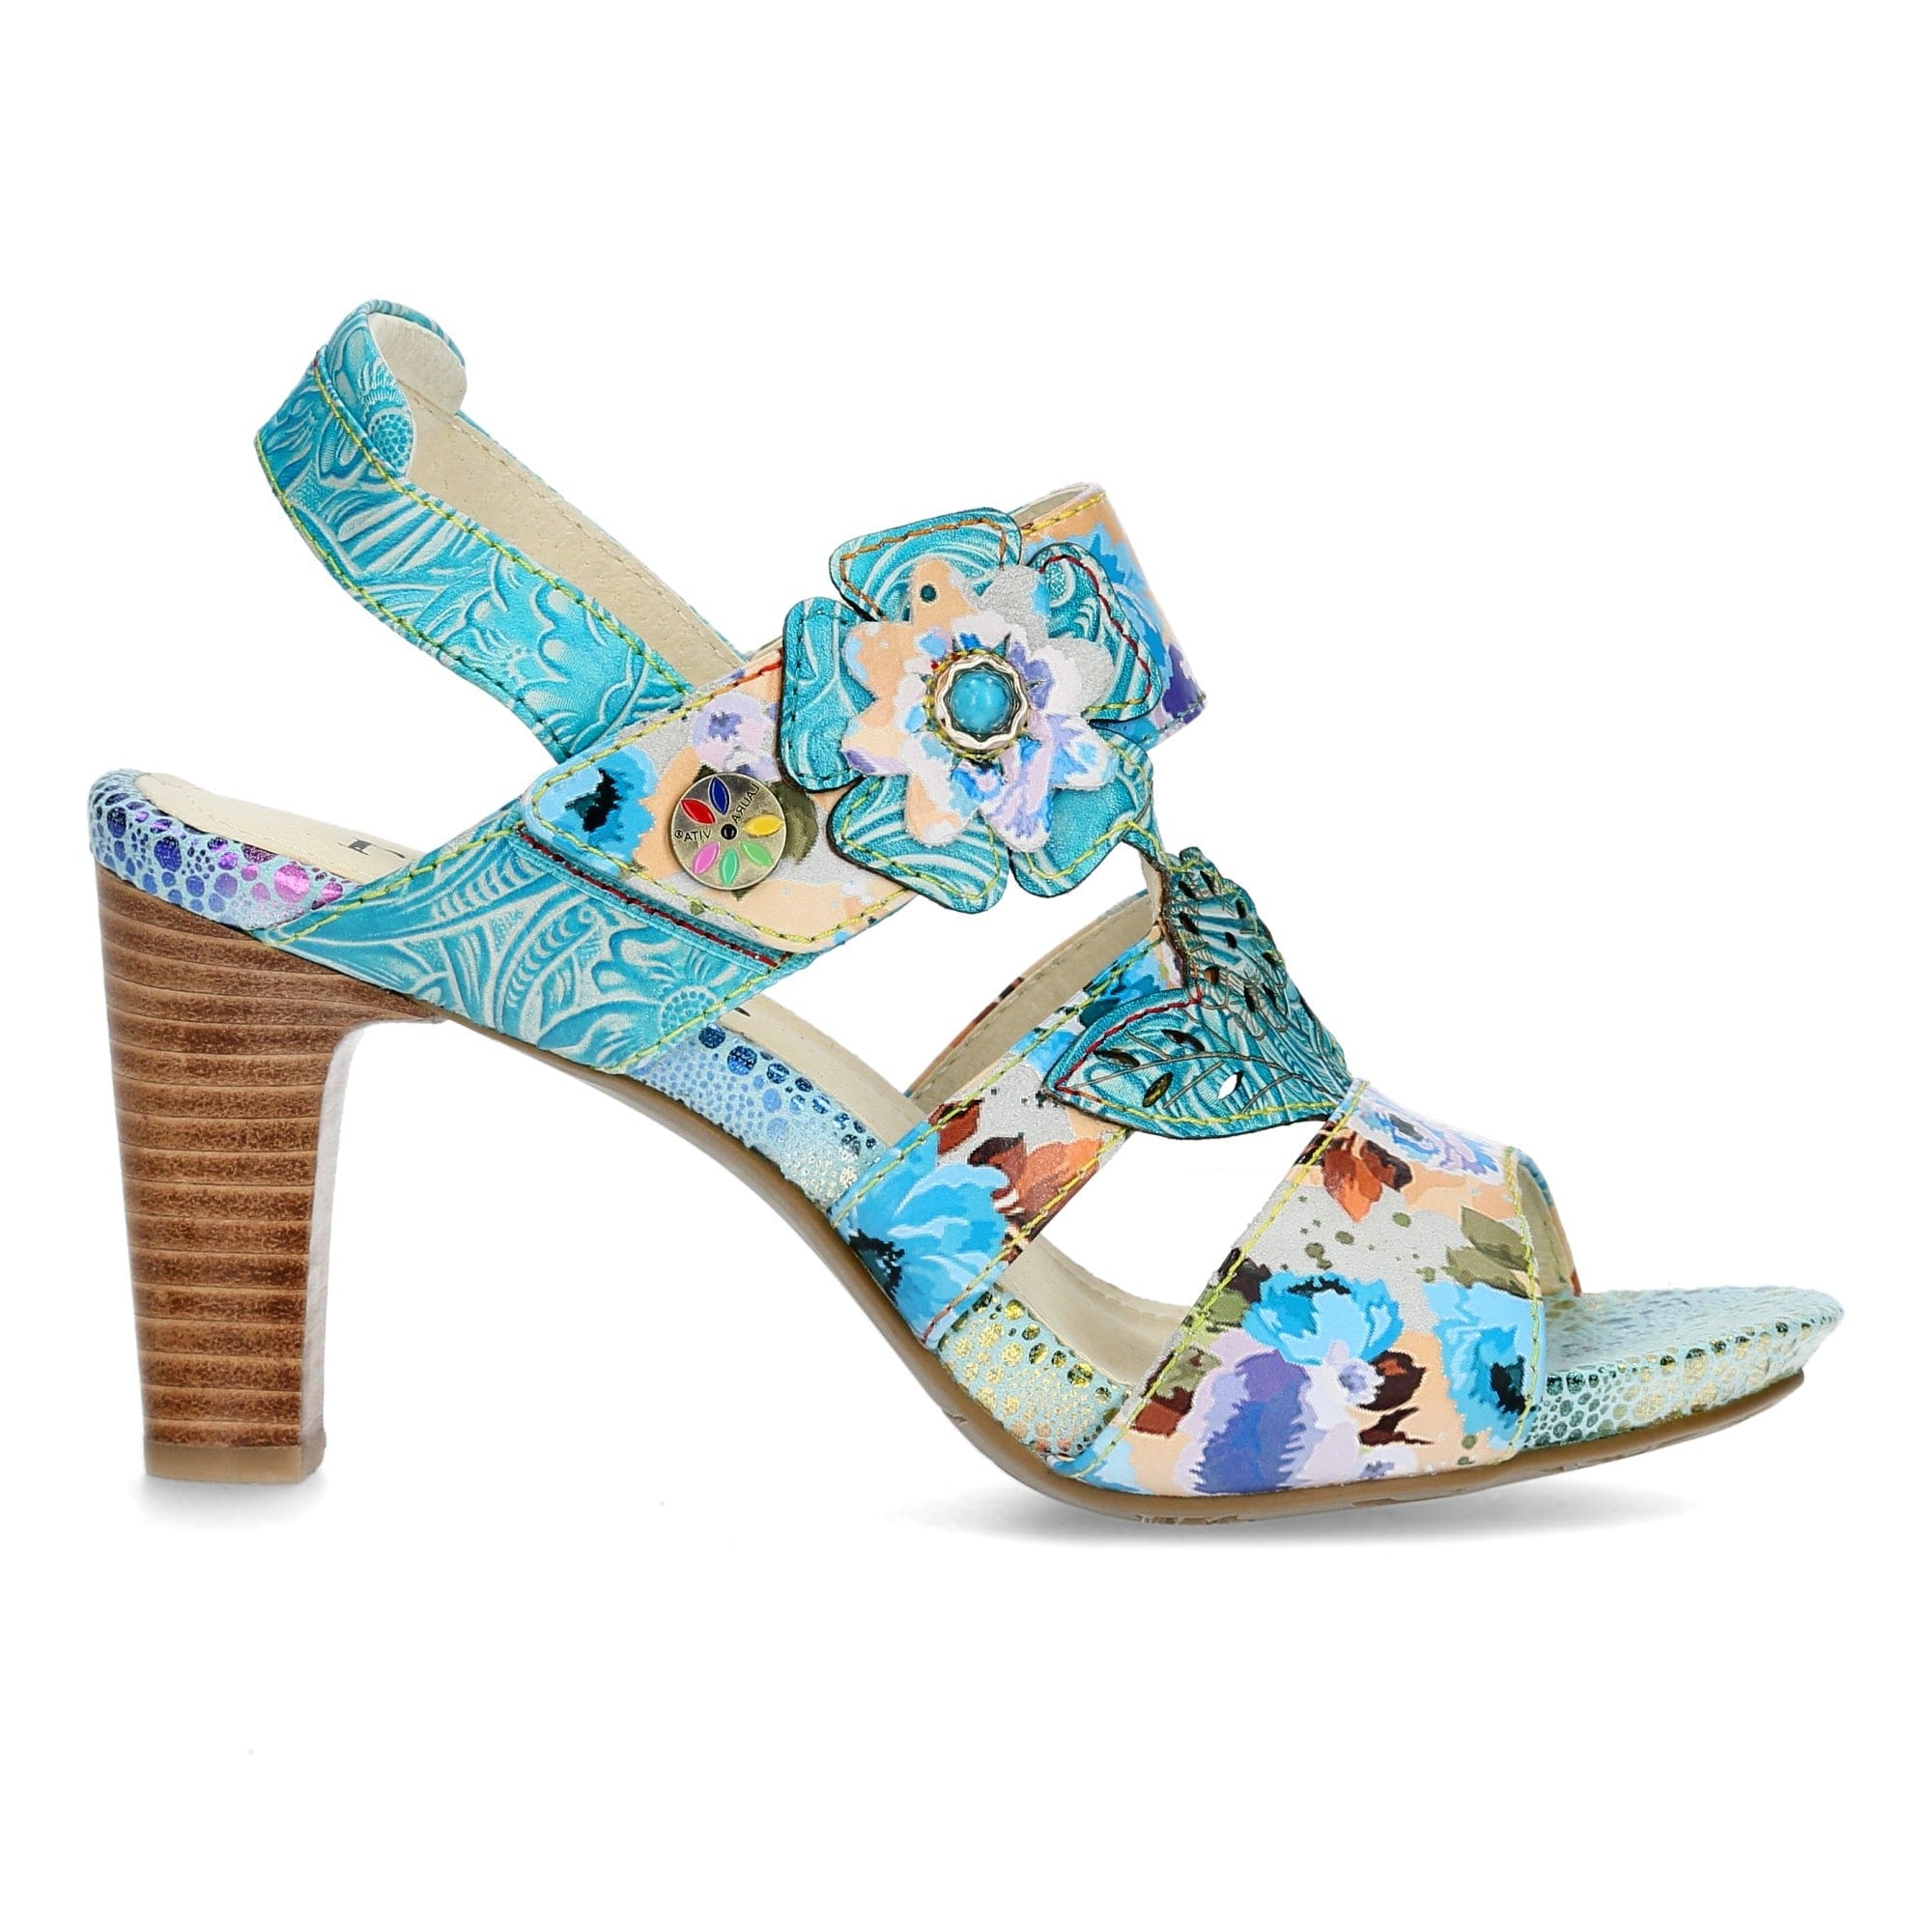 Chaussure ALBANE 73 - 35 / Turquoise - Sandale